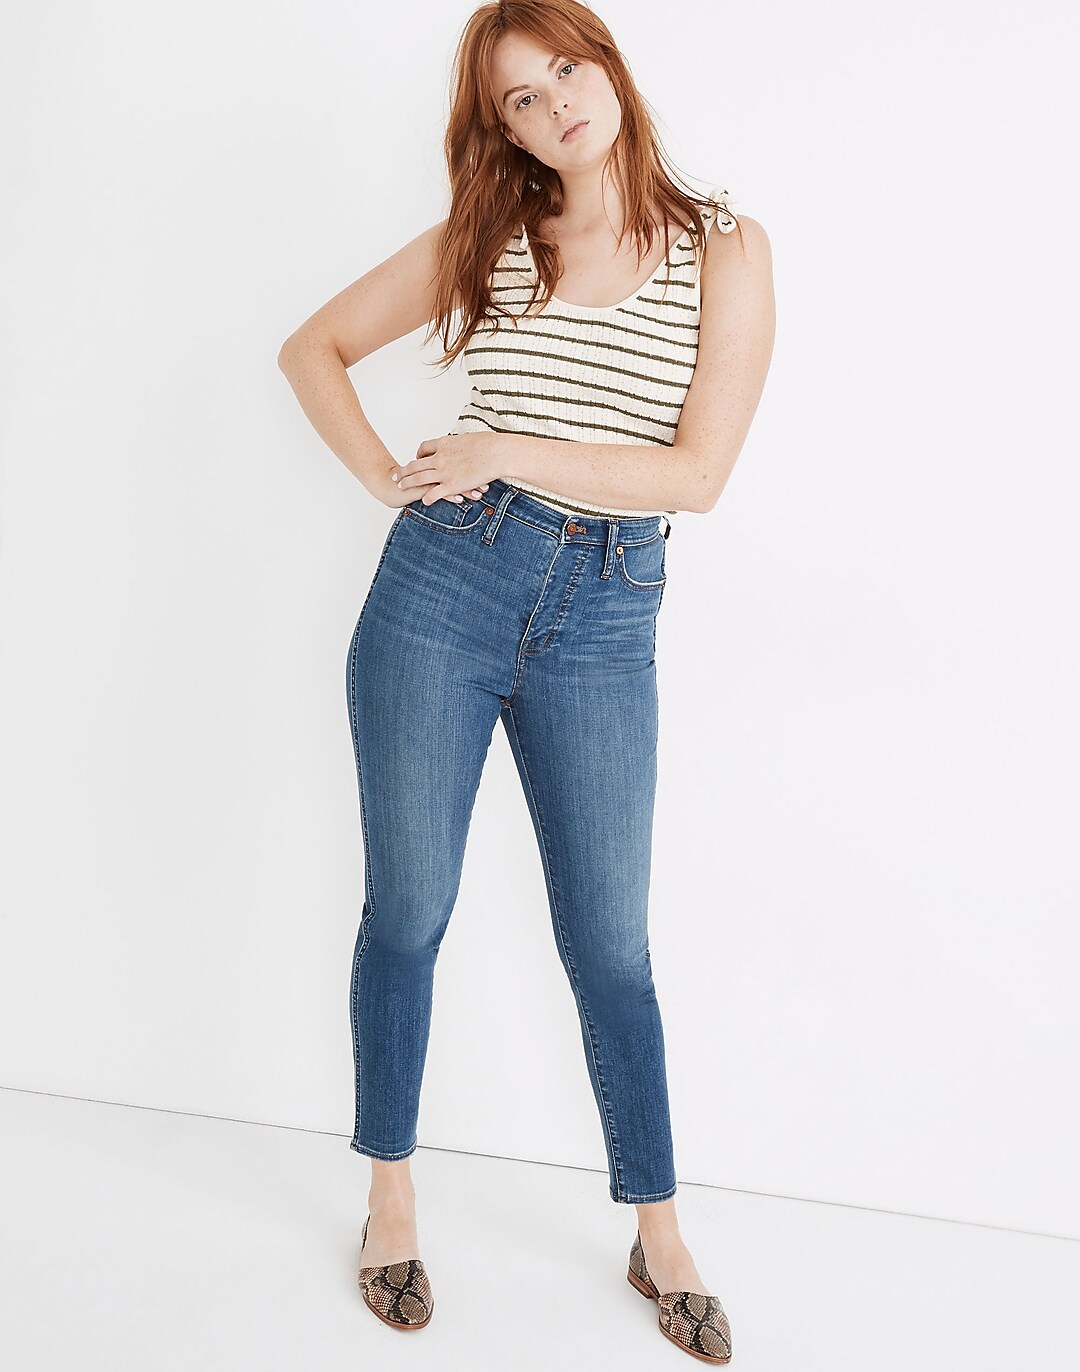 Petite Curvy Stovepipe Jeans in Leman Wash: TENCEL™ Denim Edition